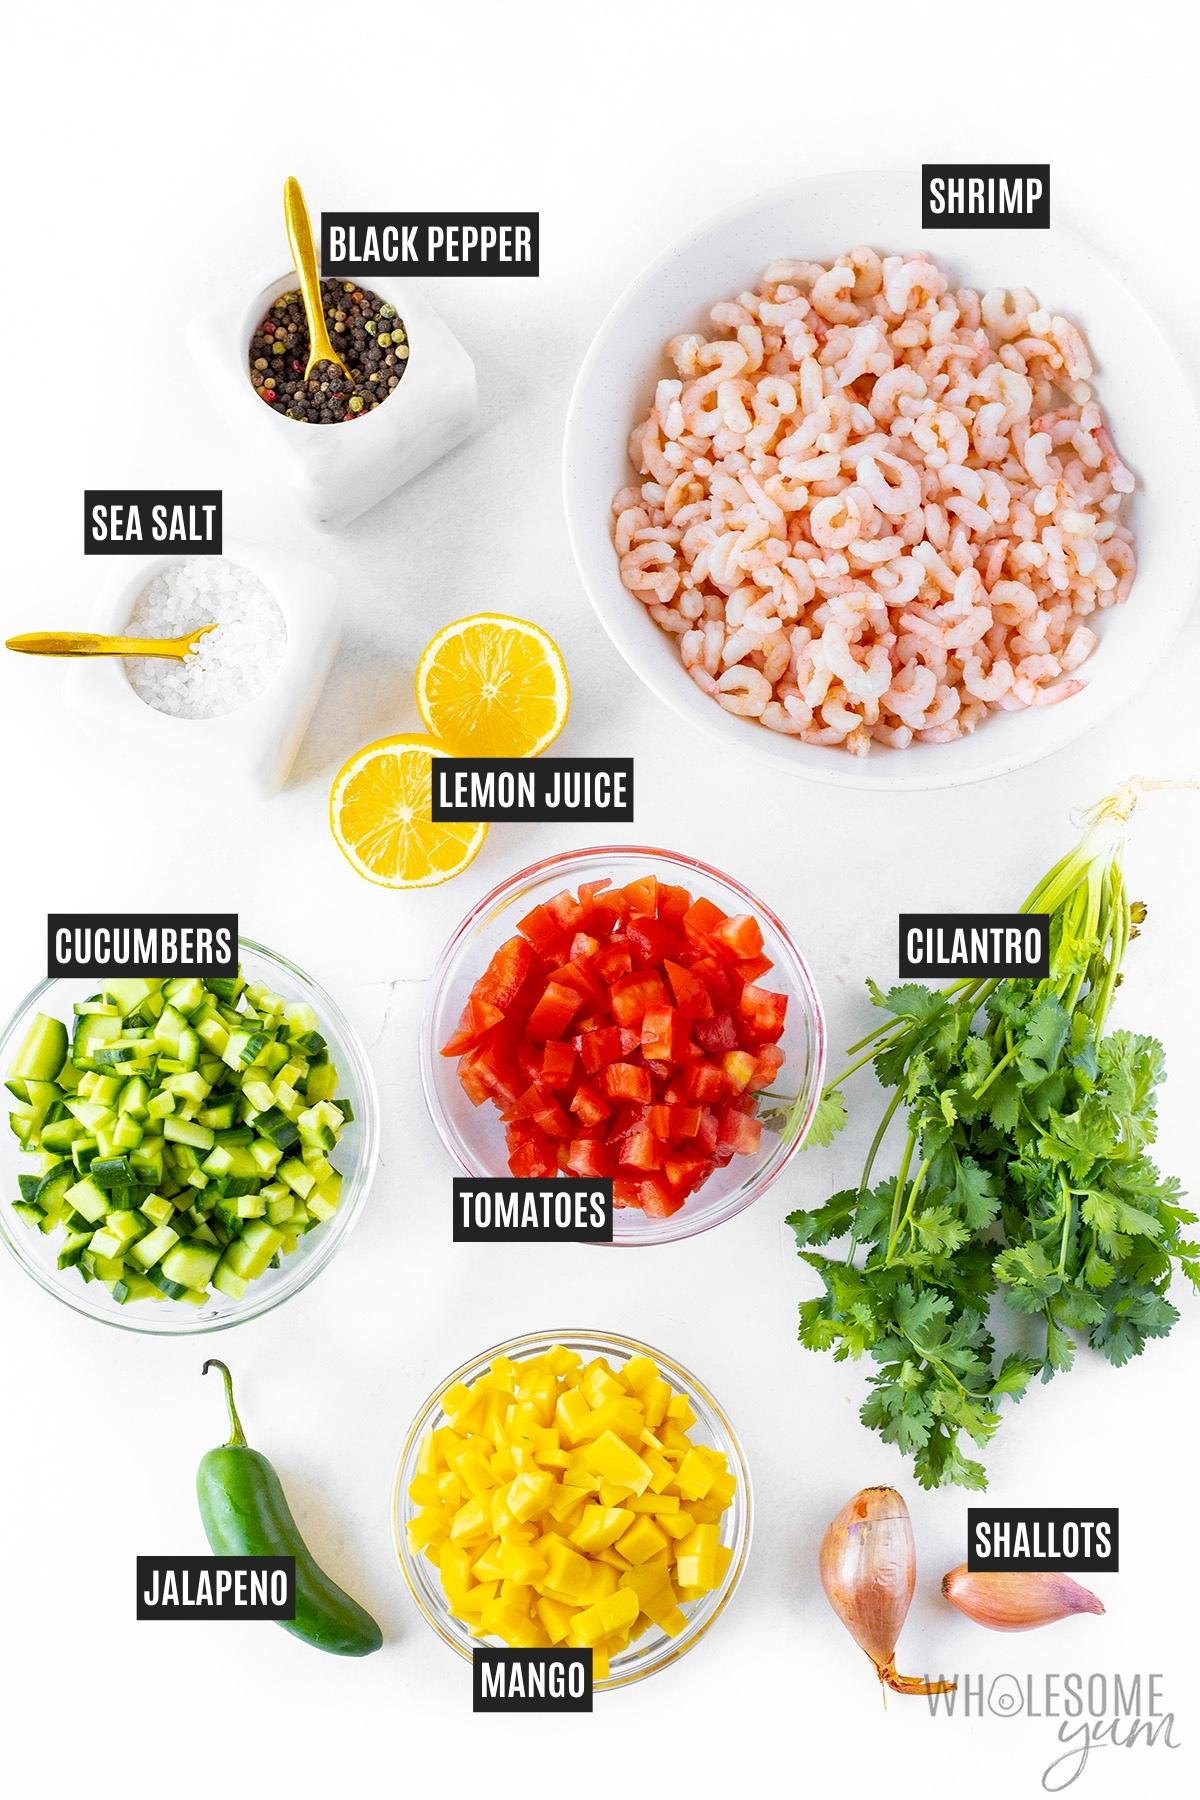 Shrimp ceviche ingredients in bowls.